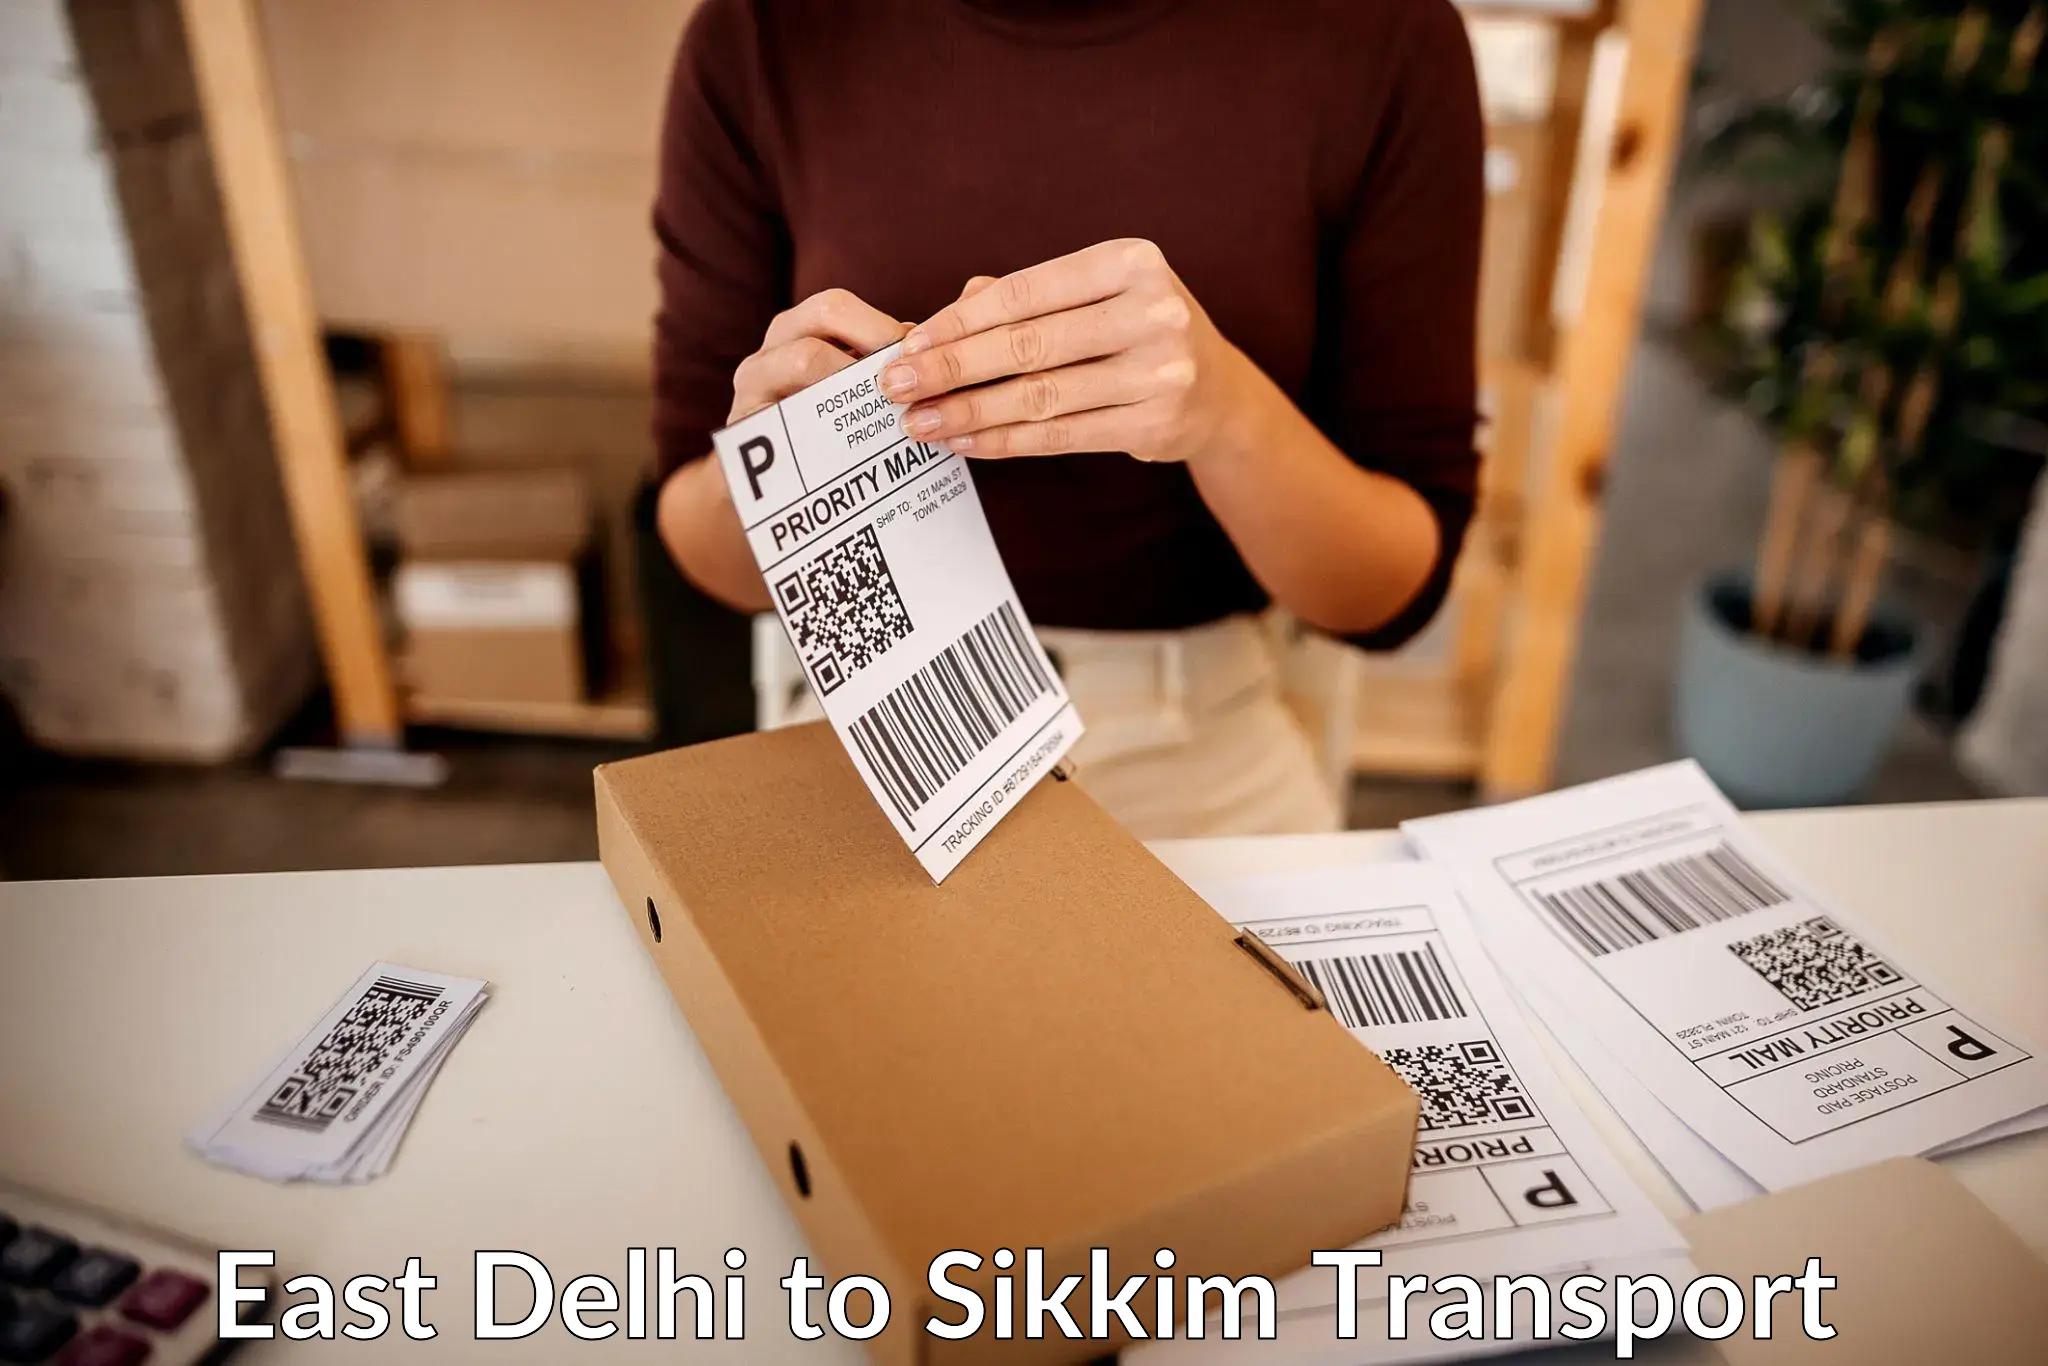 Daily parcel service transport East Delhi to Sikkim